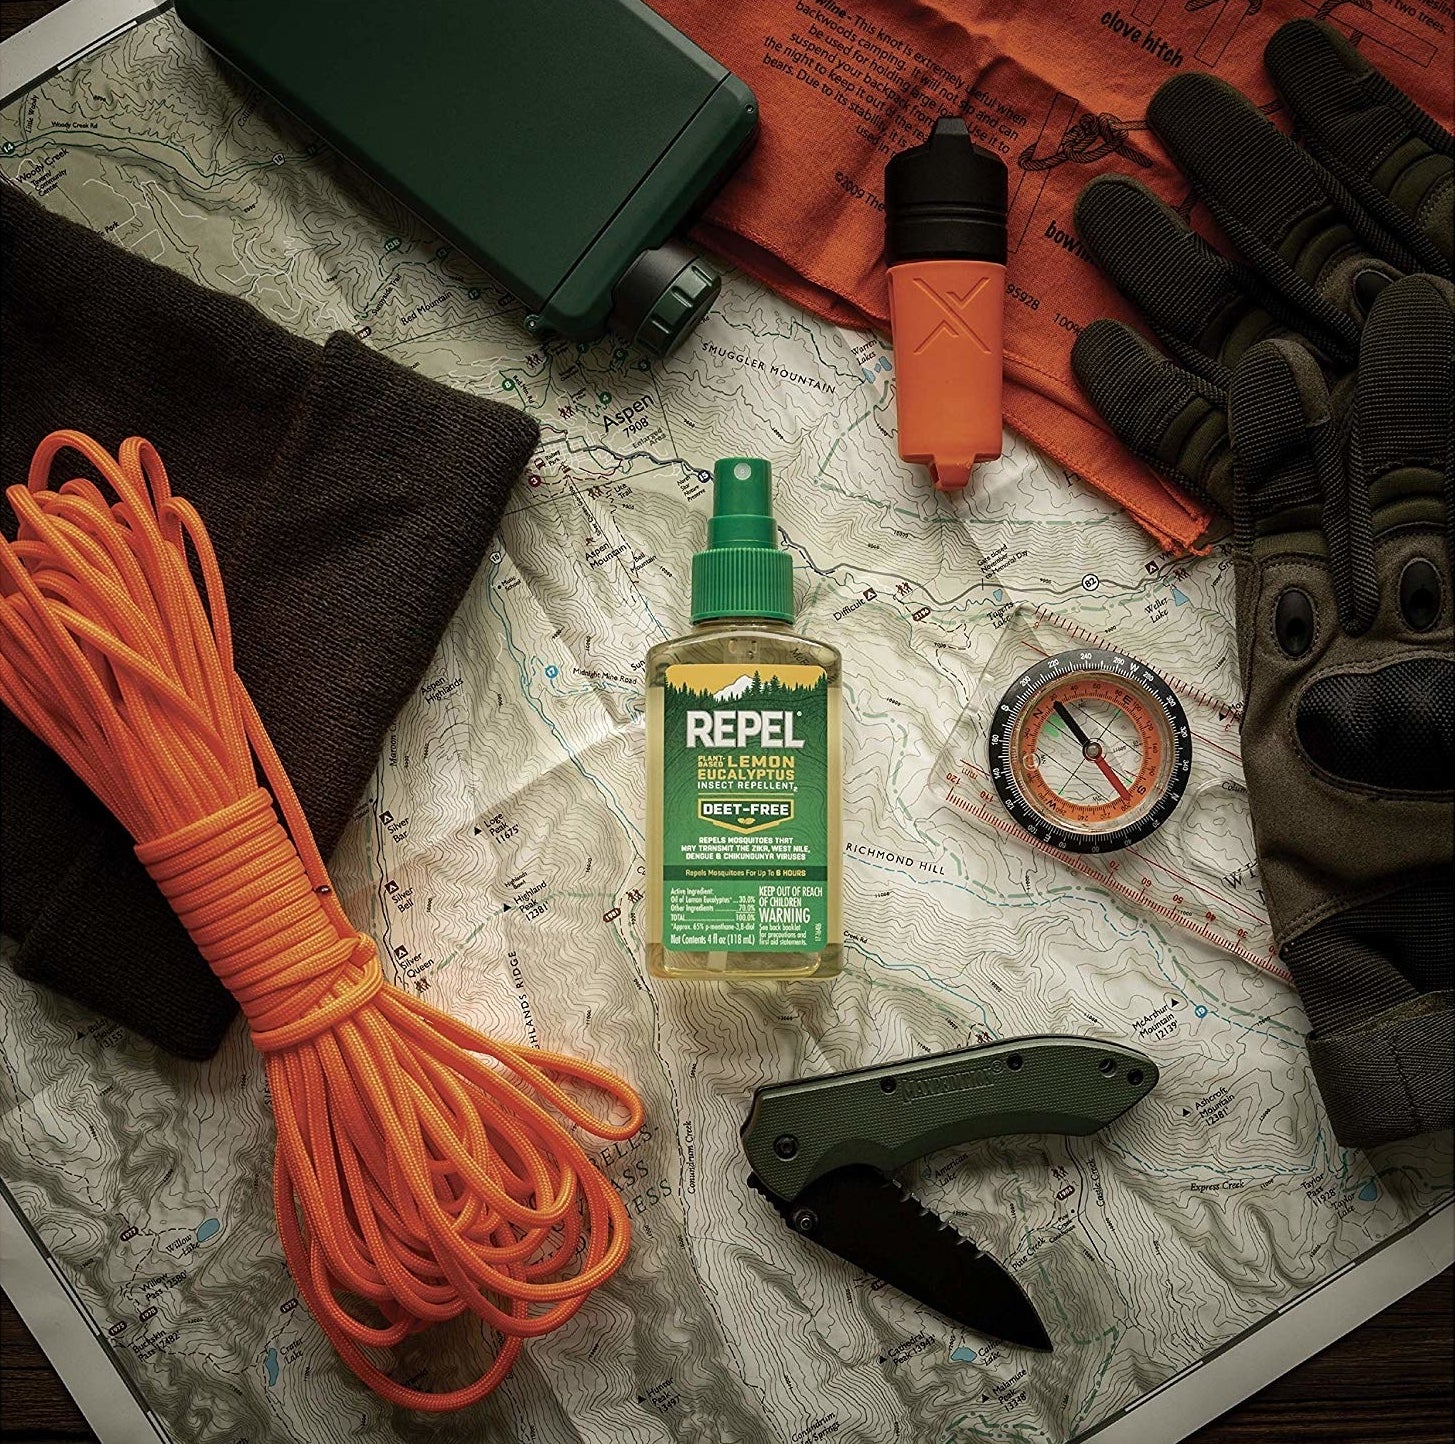 The spray bottle surrounded by camping gear